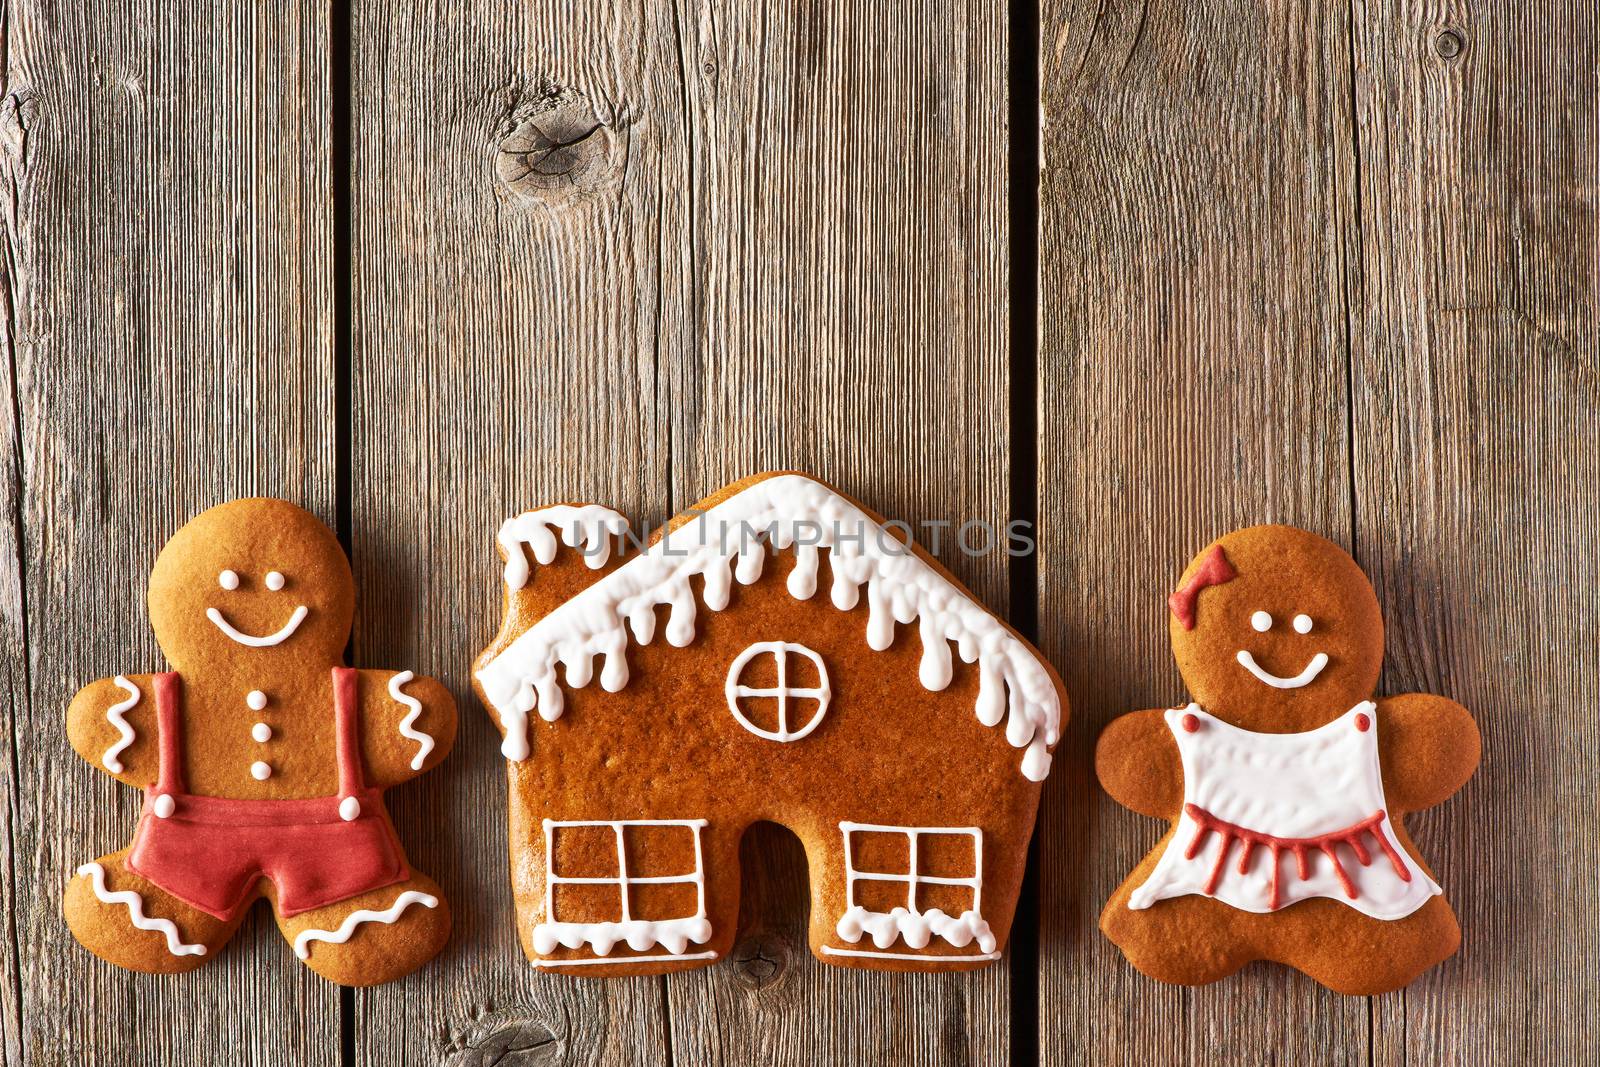 Christmas gingerbread couple and house cookies by haveseen